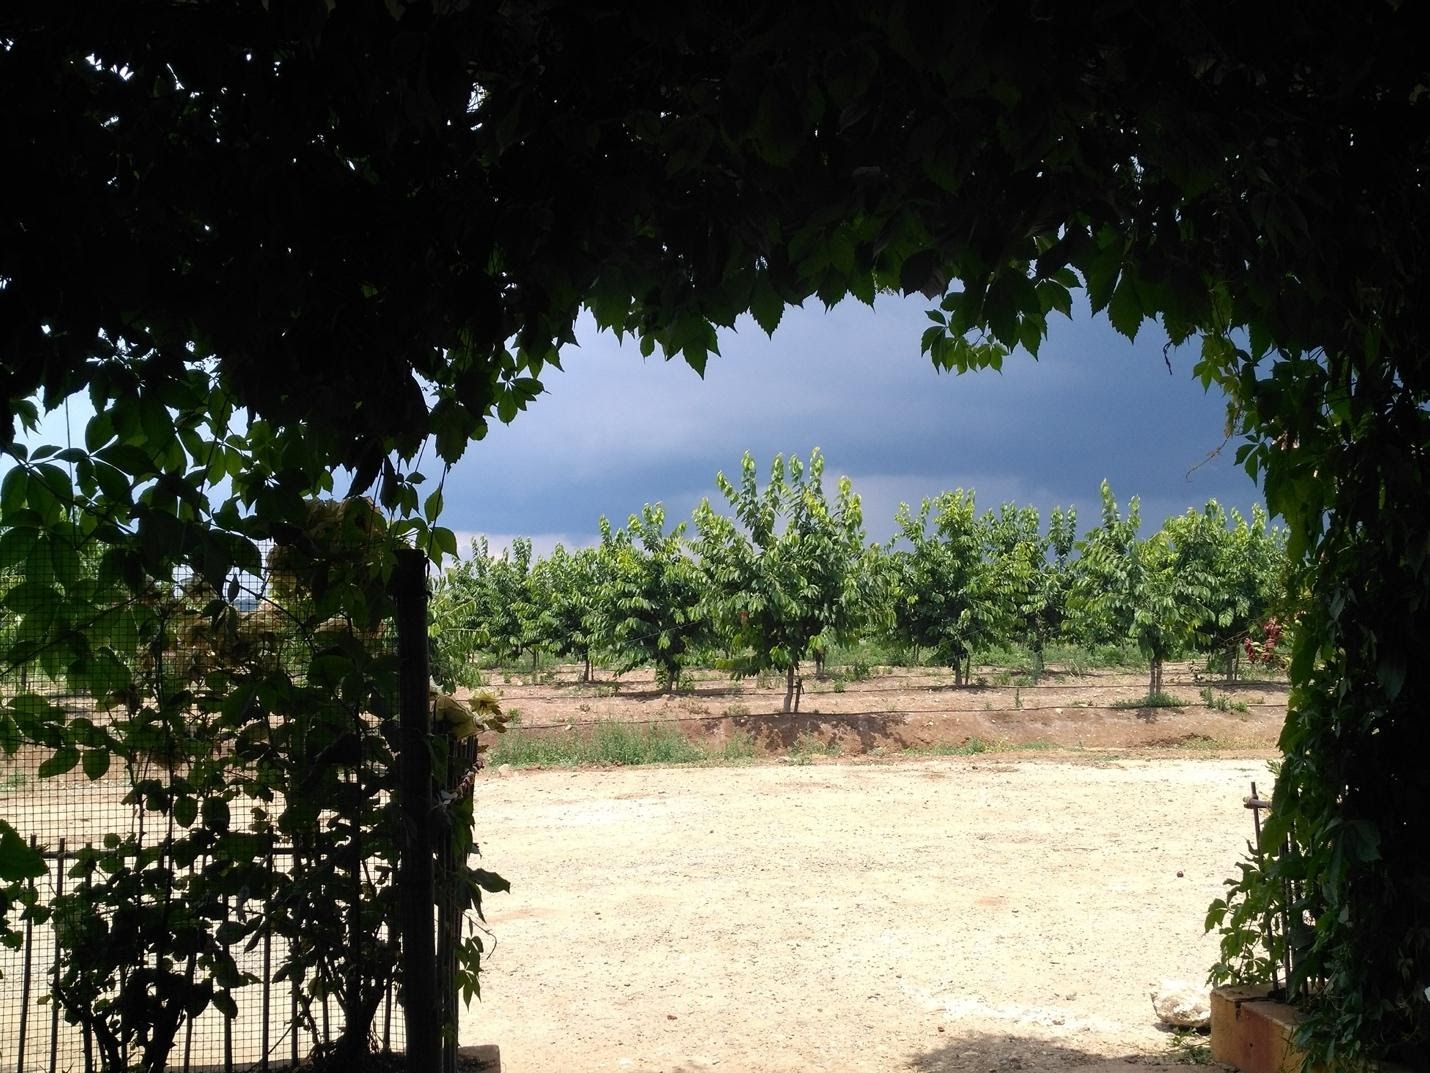 cherry orchard in the background visible partly through an arch of leaves in the foreground. the background is very dry and sunny looking however there are dark clouds in the sky signalling rain is coming